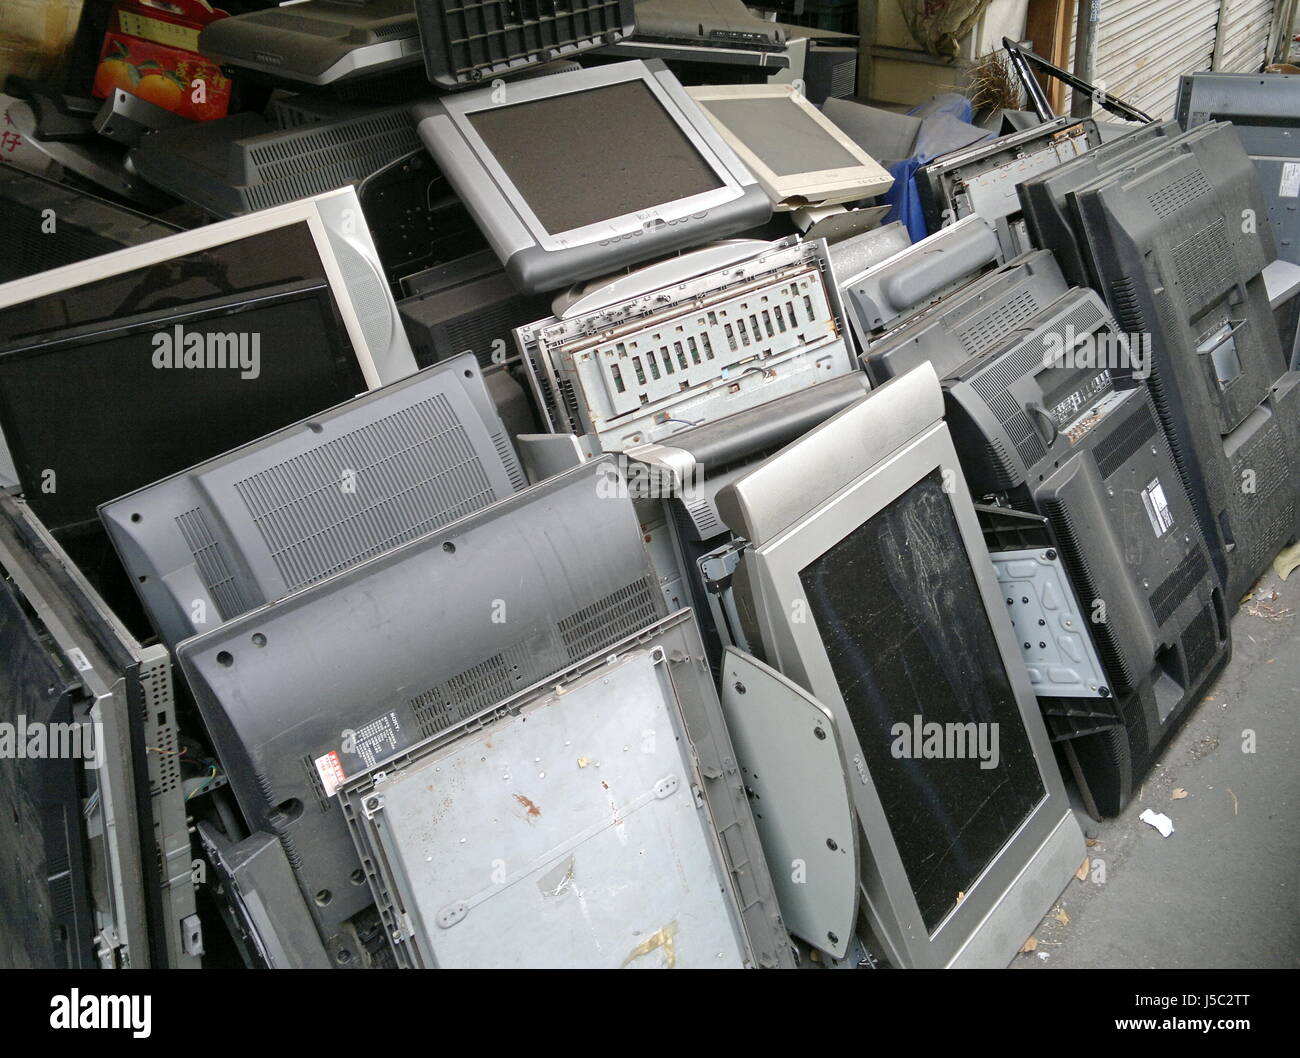 KAOHSIUNG, TAIWAN -- MAY 13, 2017: Stacks of old flat panel televisions are waiting to be shipped to recycling plant. Stock Photo